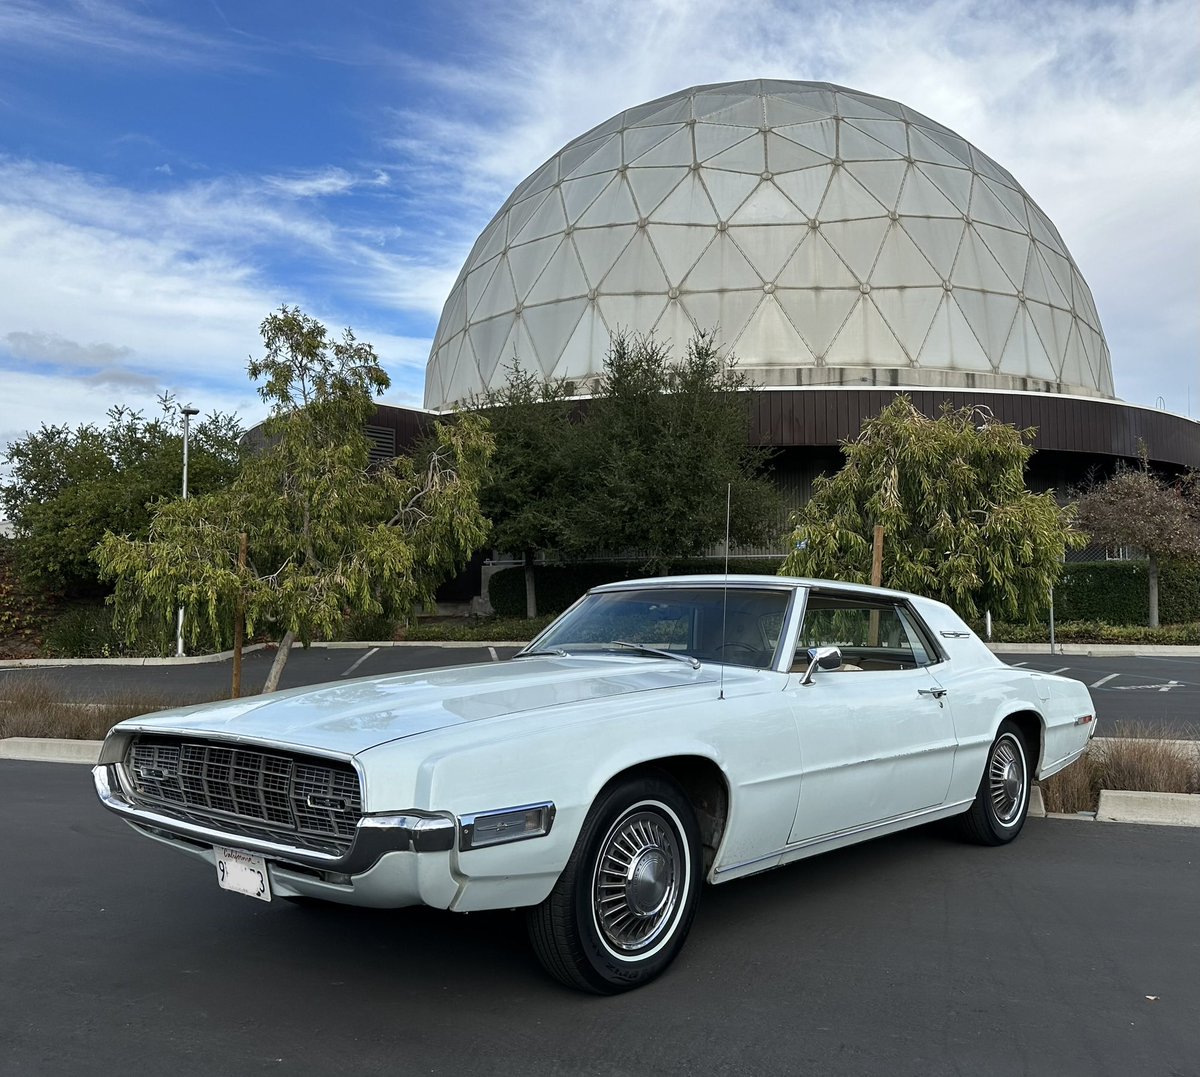 Did a fun photo shoot yesterday with the car. Building in background is a PG&E test lab built in early 70’s (almost same age as the car) #StarTrek #DeForestKelley